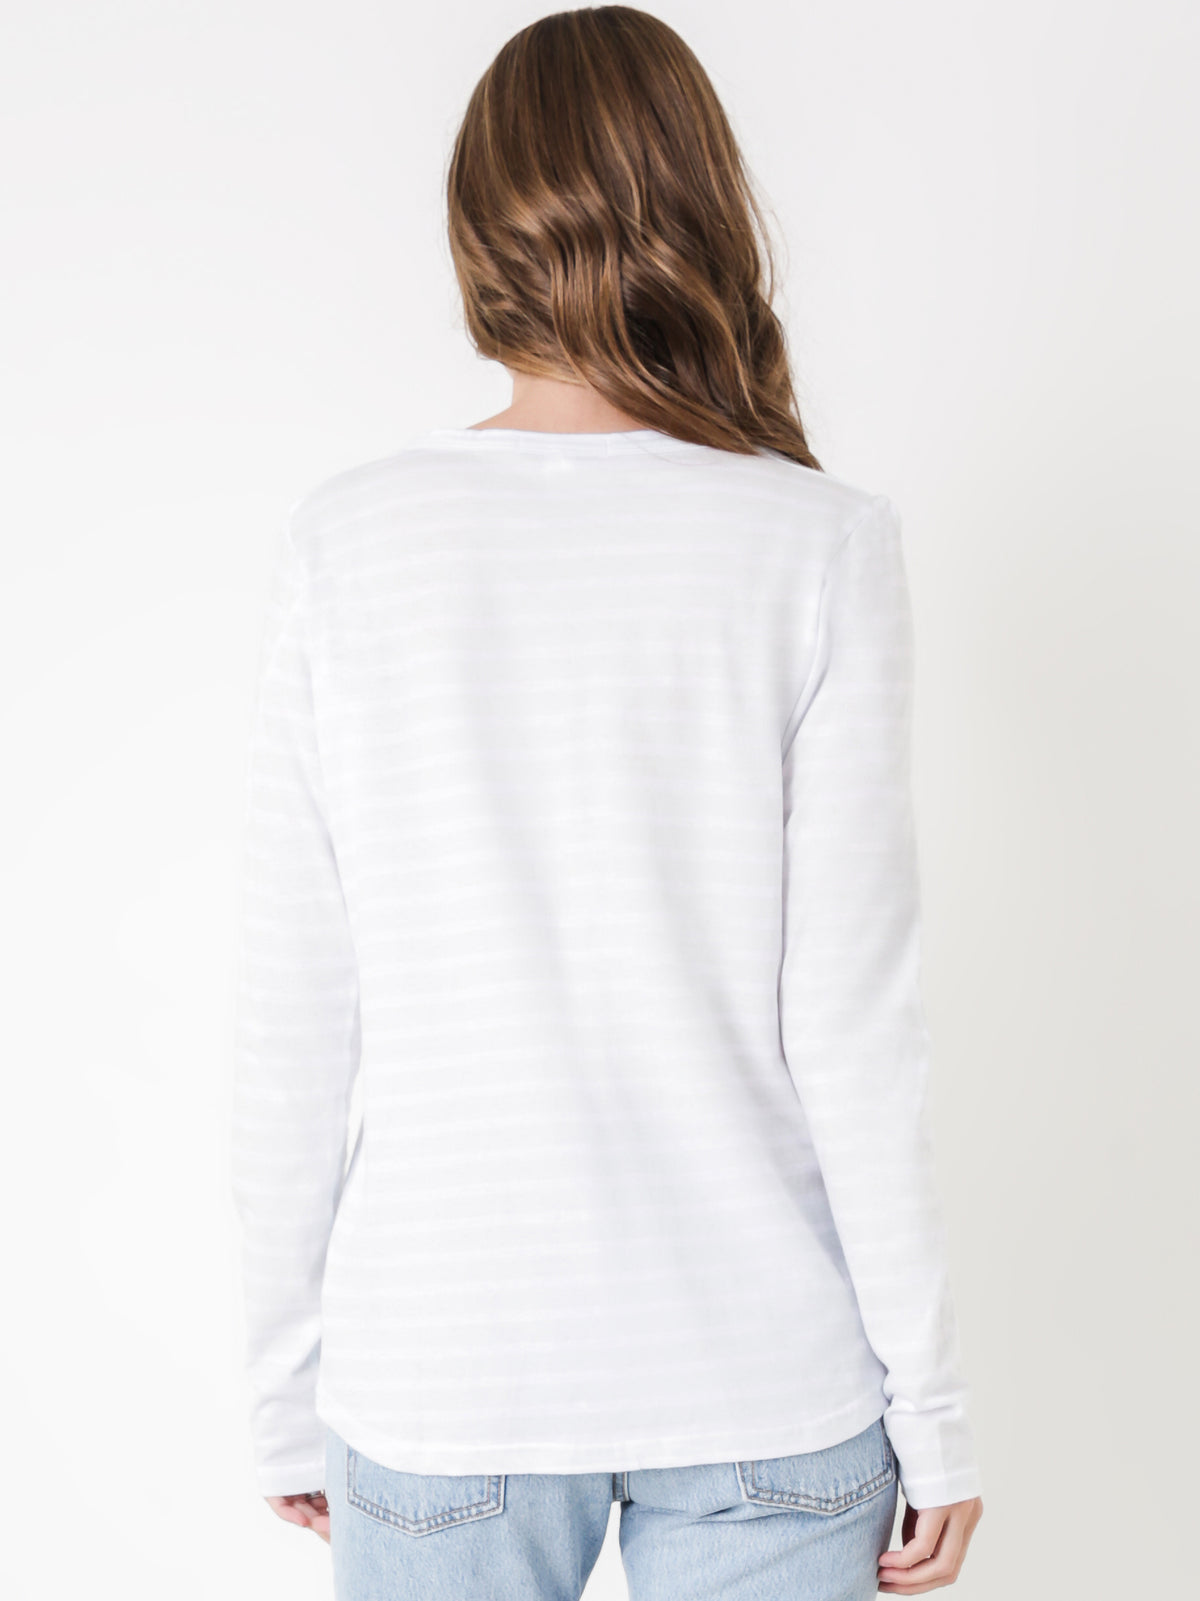 Haraway Long Sleeve T-Shirt in Ice &amp; White Stripe